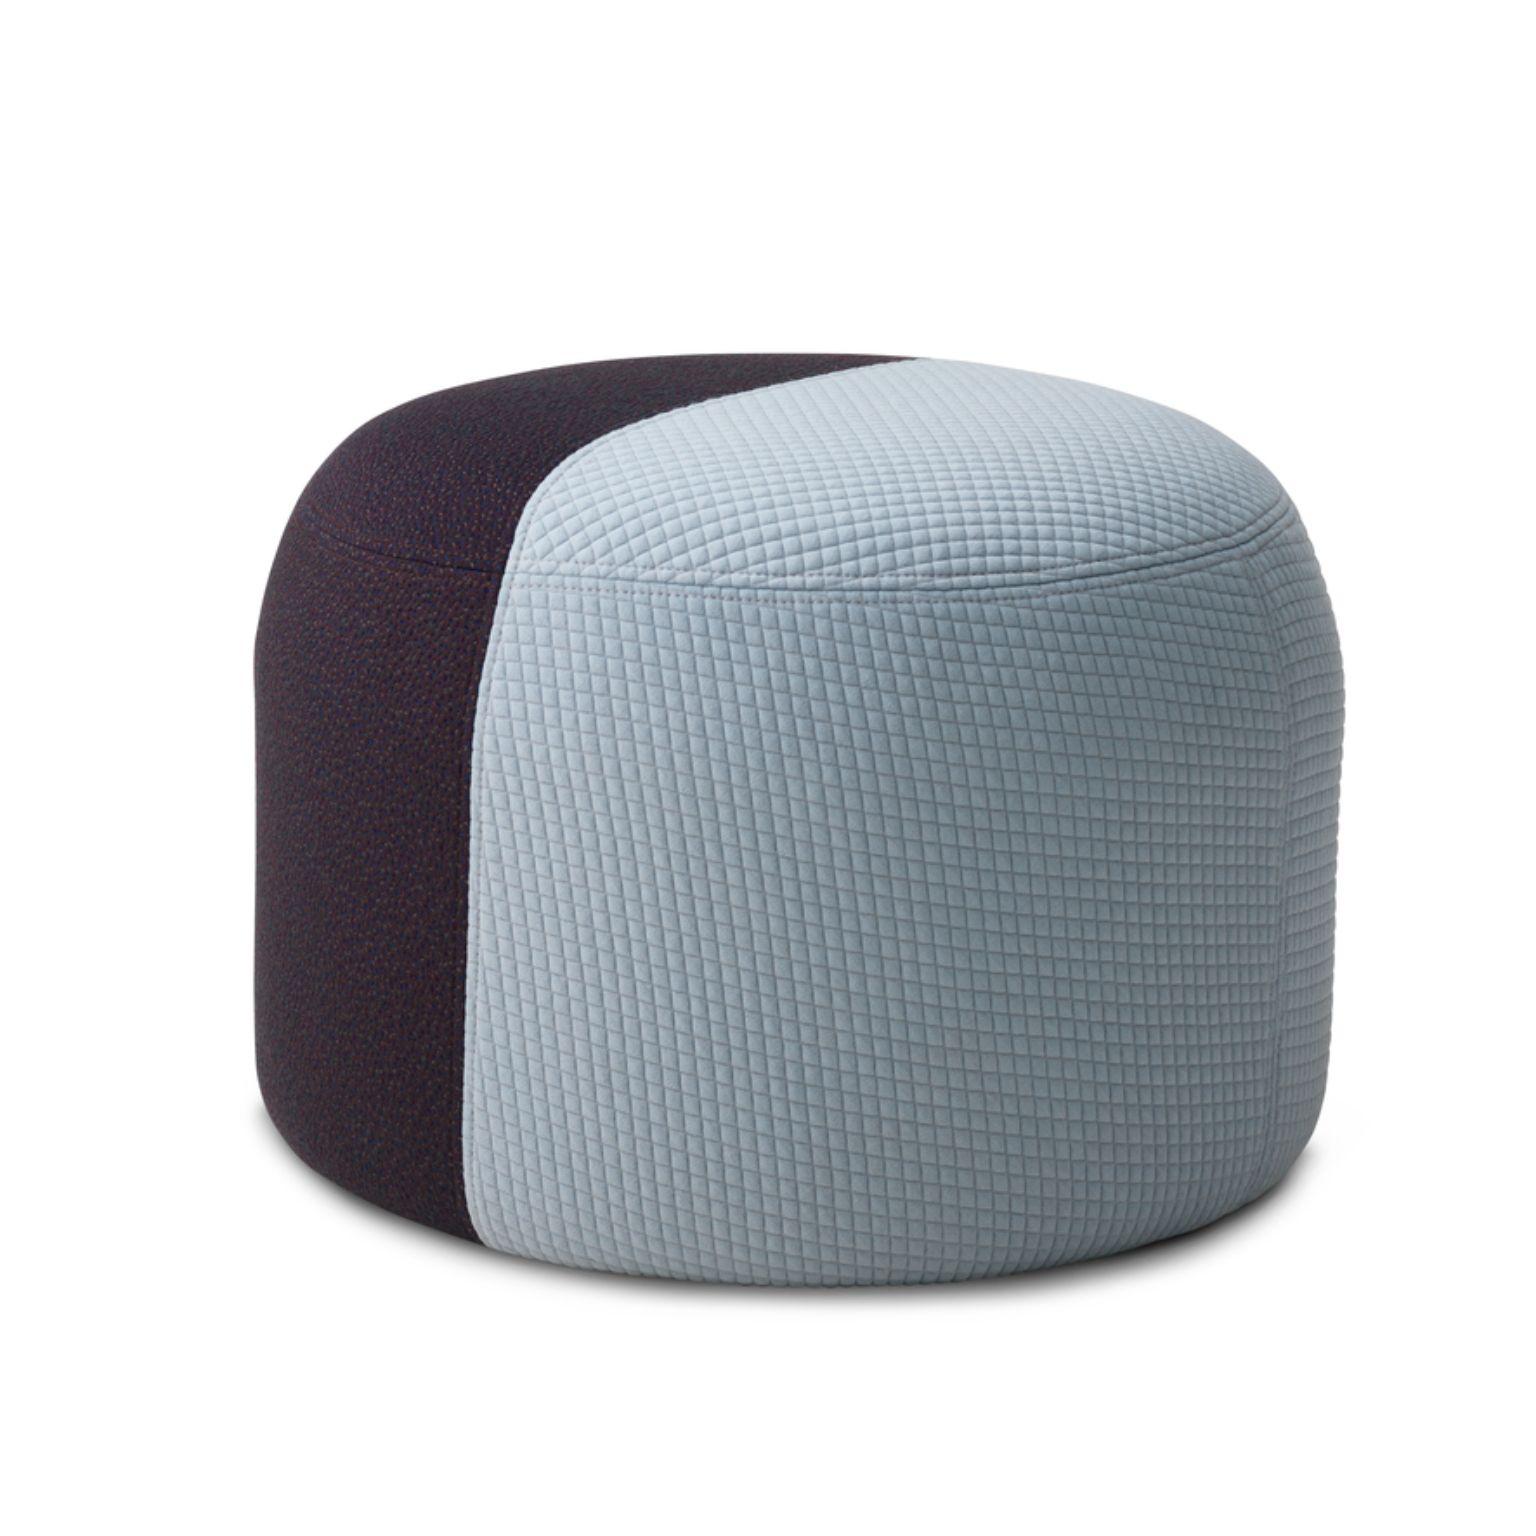 Dainty Pouf Mosaic light blue eggplant by Warm Nordic
Dimensions: D 55 x H 39 cm
Material: Textile upholstery, Wooden frame, foam.
Weight: 9.5 kg
Also available in different colours and finishes.

Sophisticated, two-coloured pouf with soft